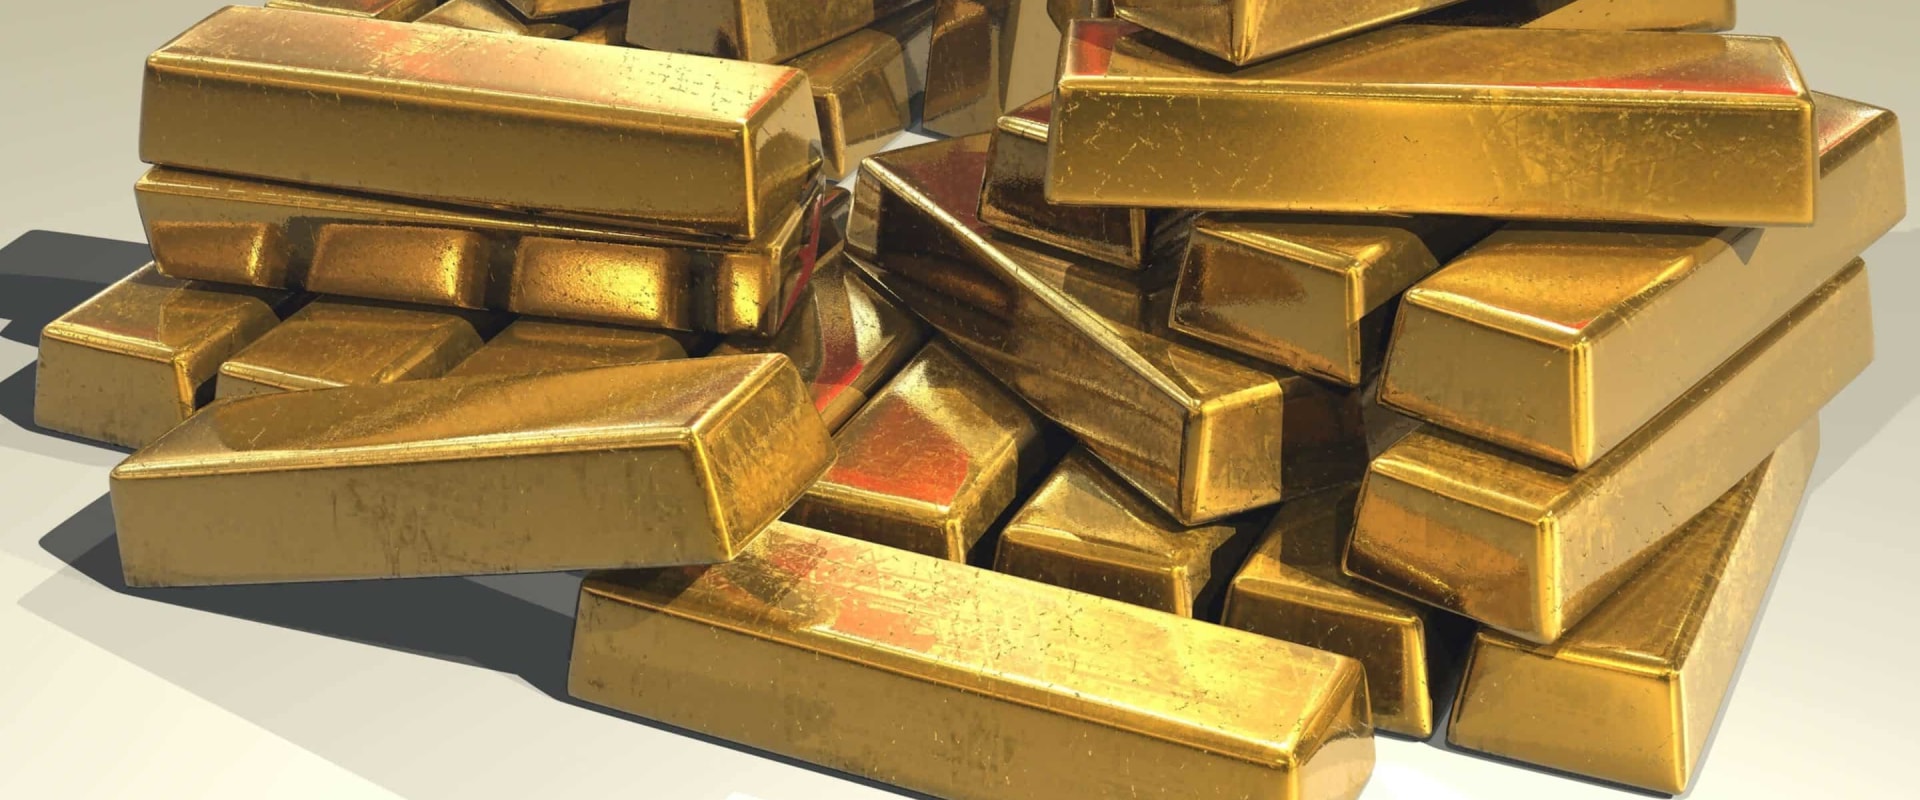 The Best Strategy for Investing in Gold